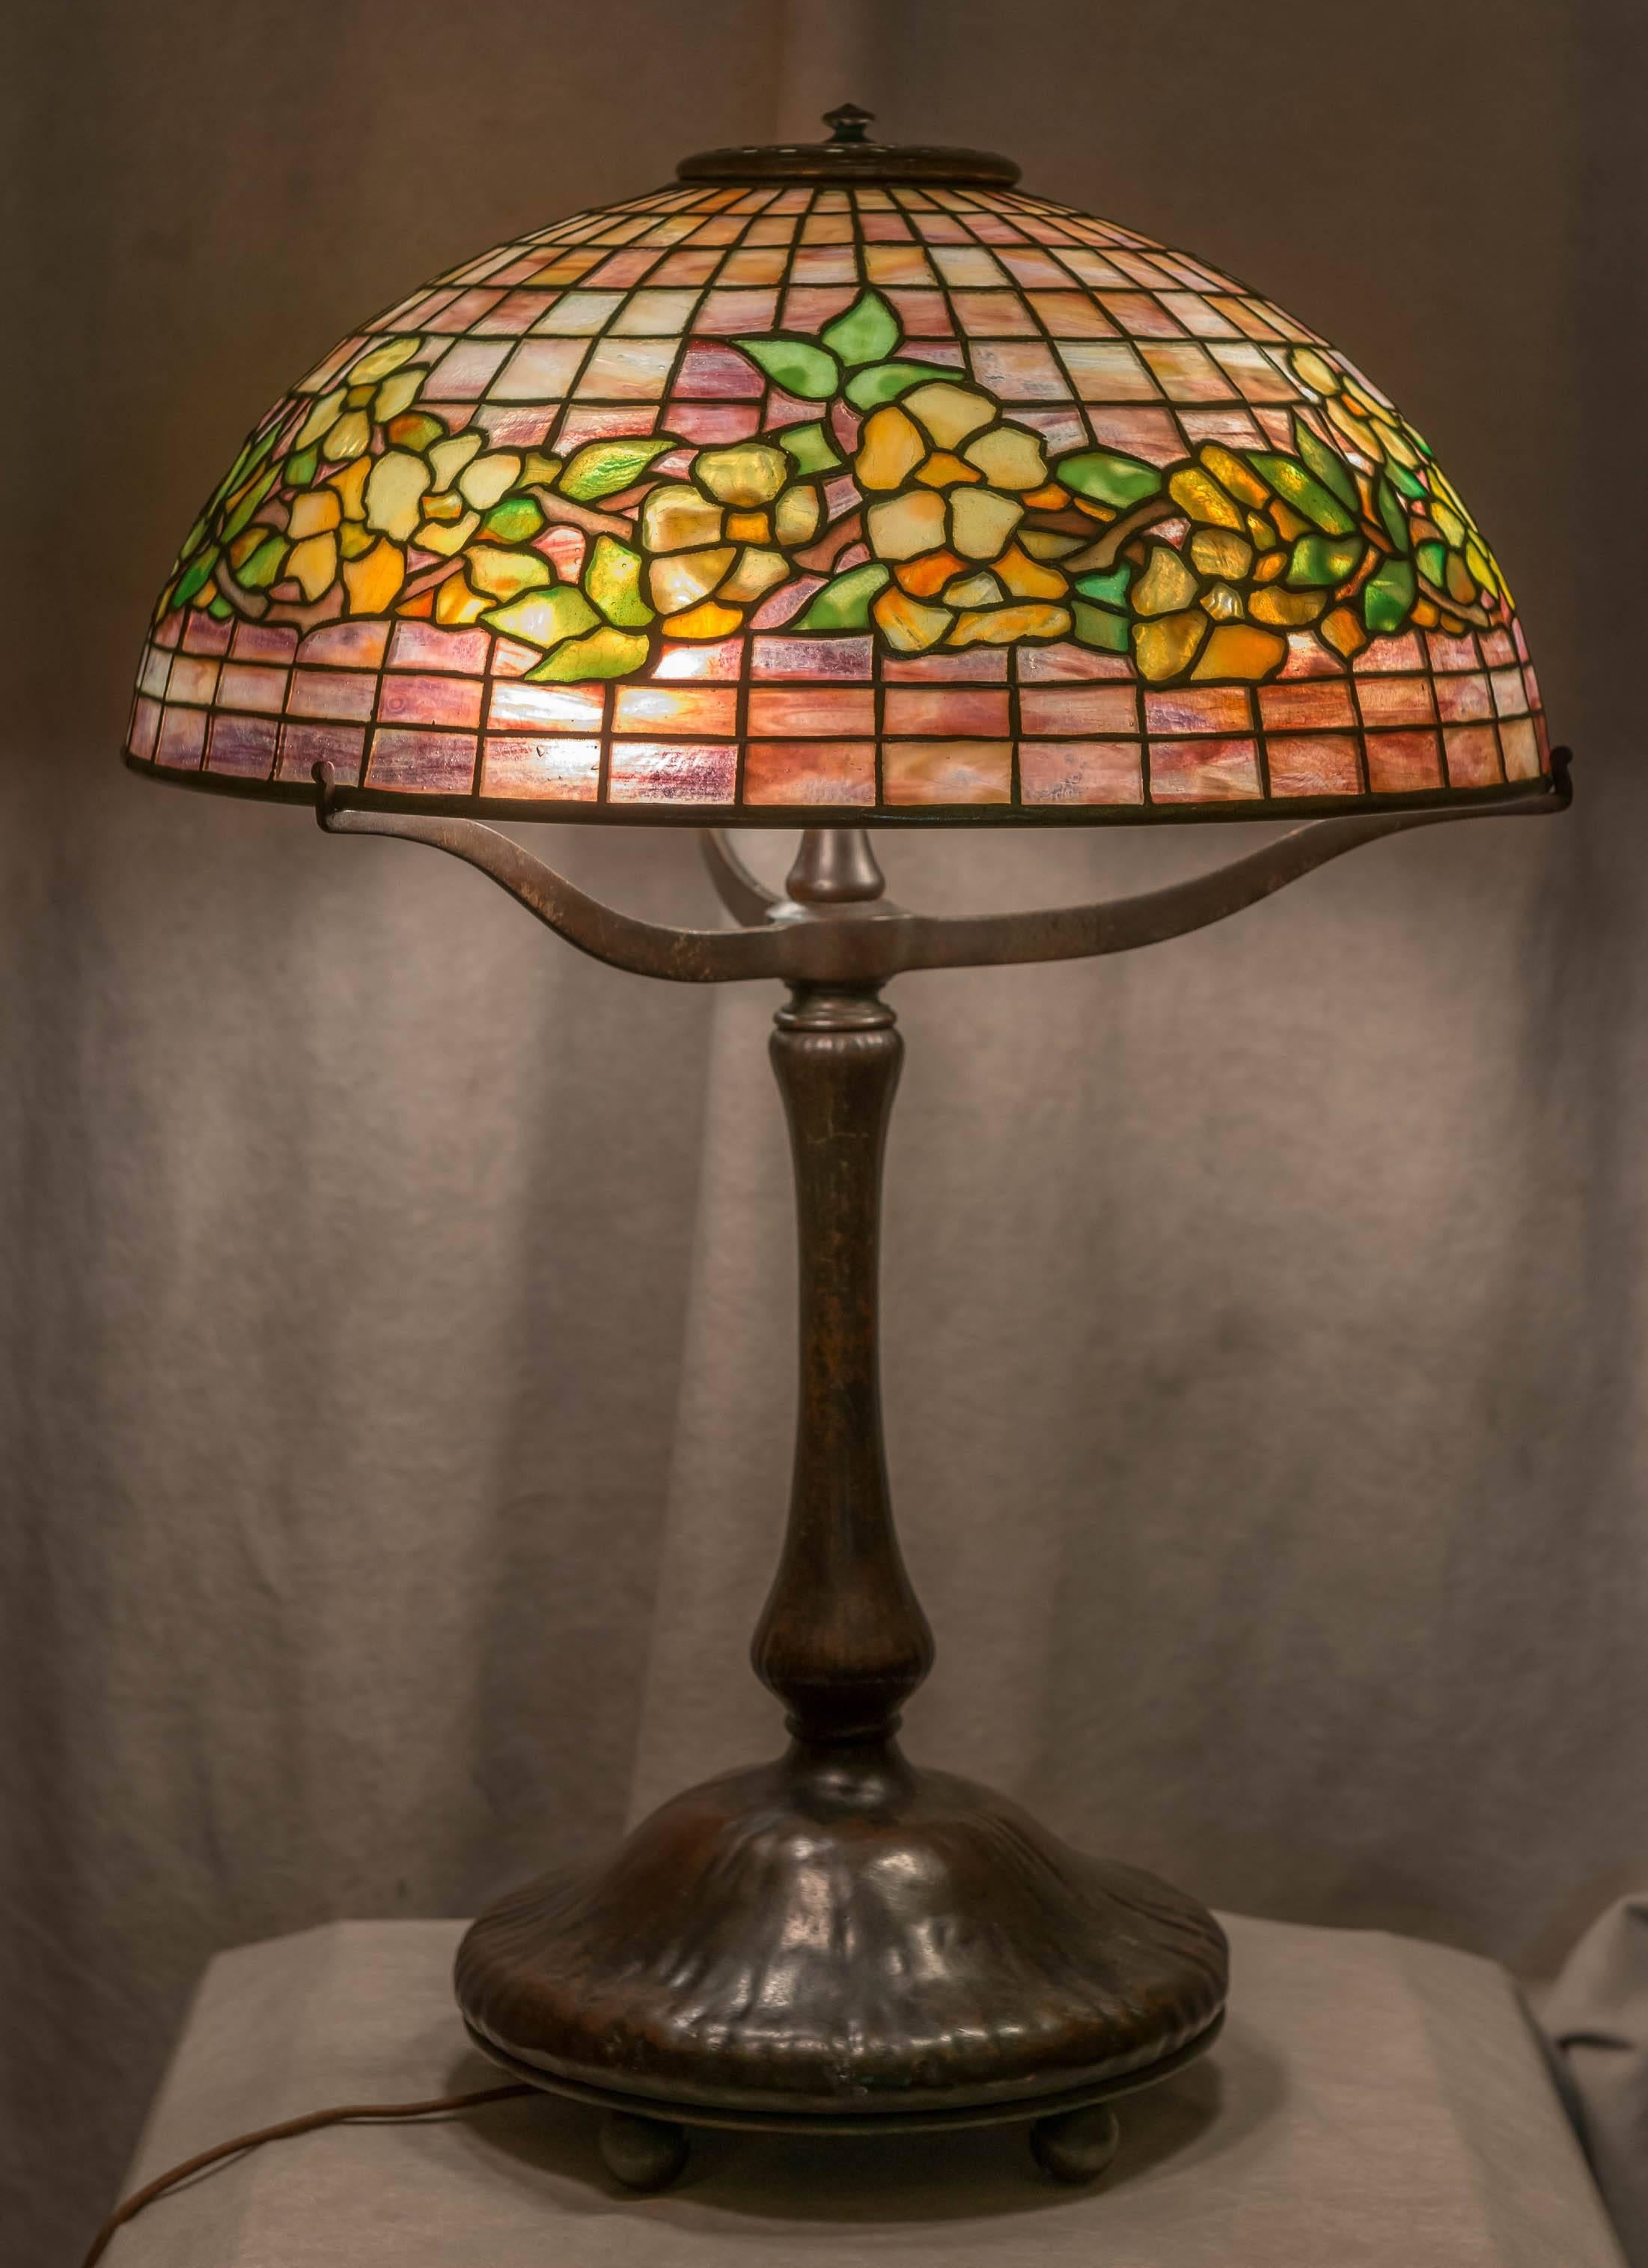 A very nice example of the beauty of the workmanship created by Tiffany Studios. The light lavender or pink background make for a nice contrast with floral design. Mounted on a richly patinated bronze base together make for a desirable package. Base